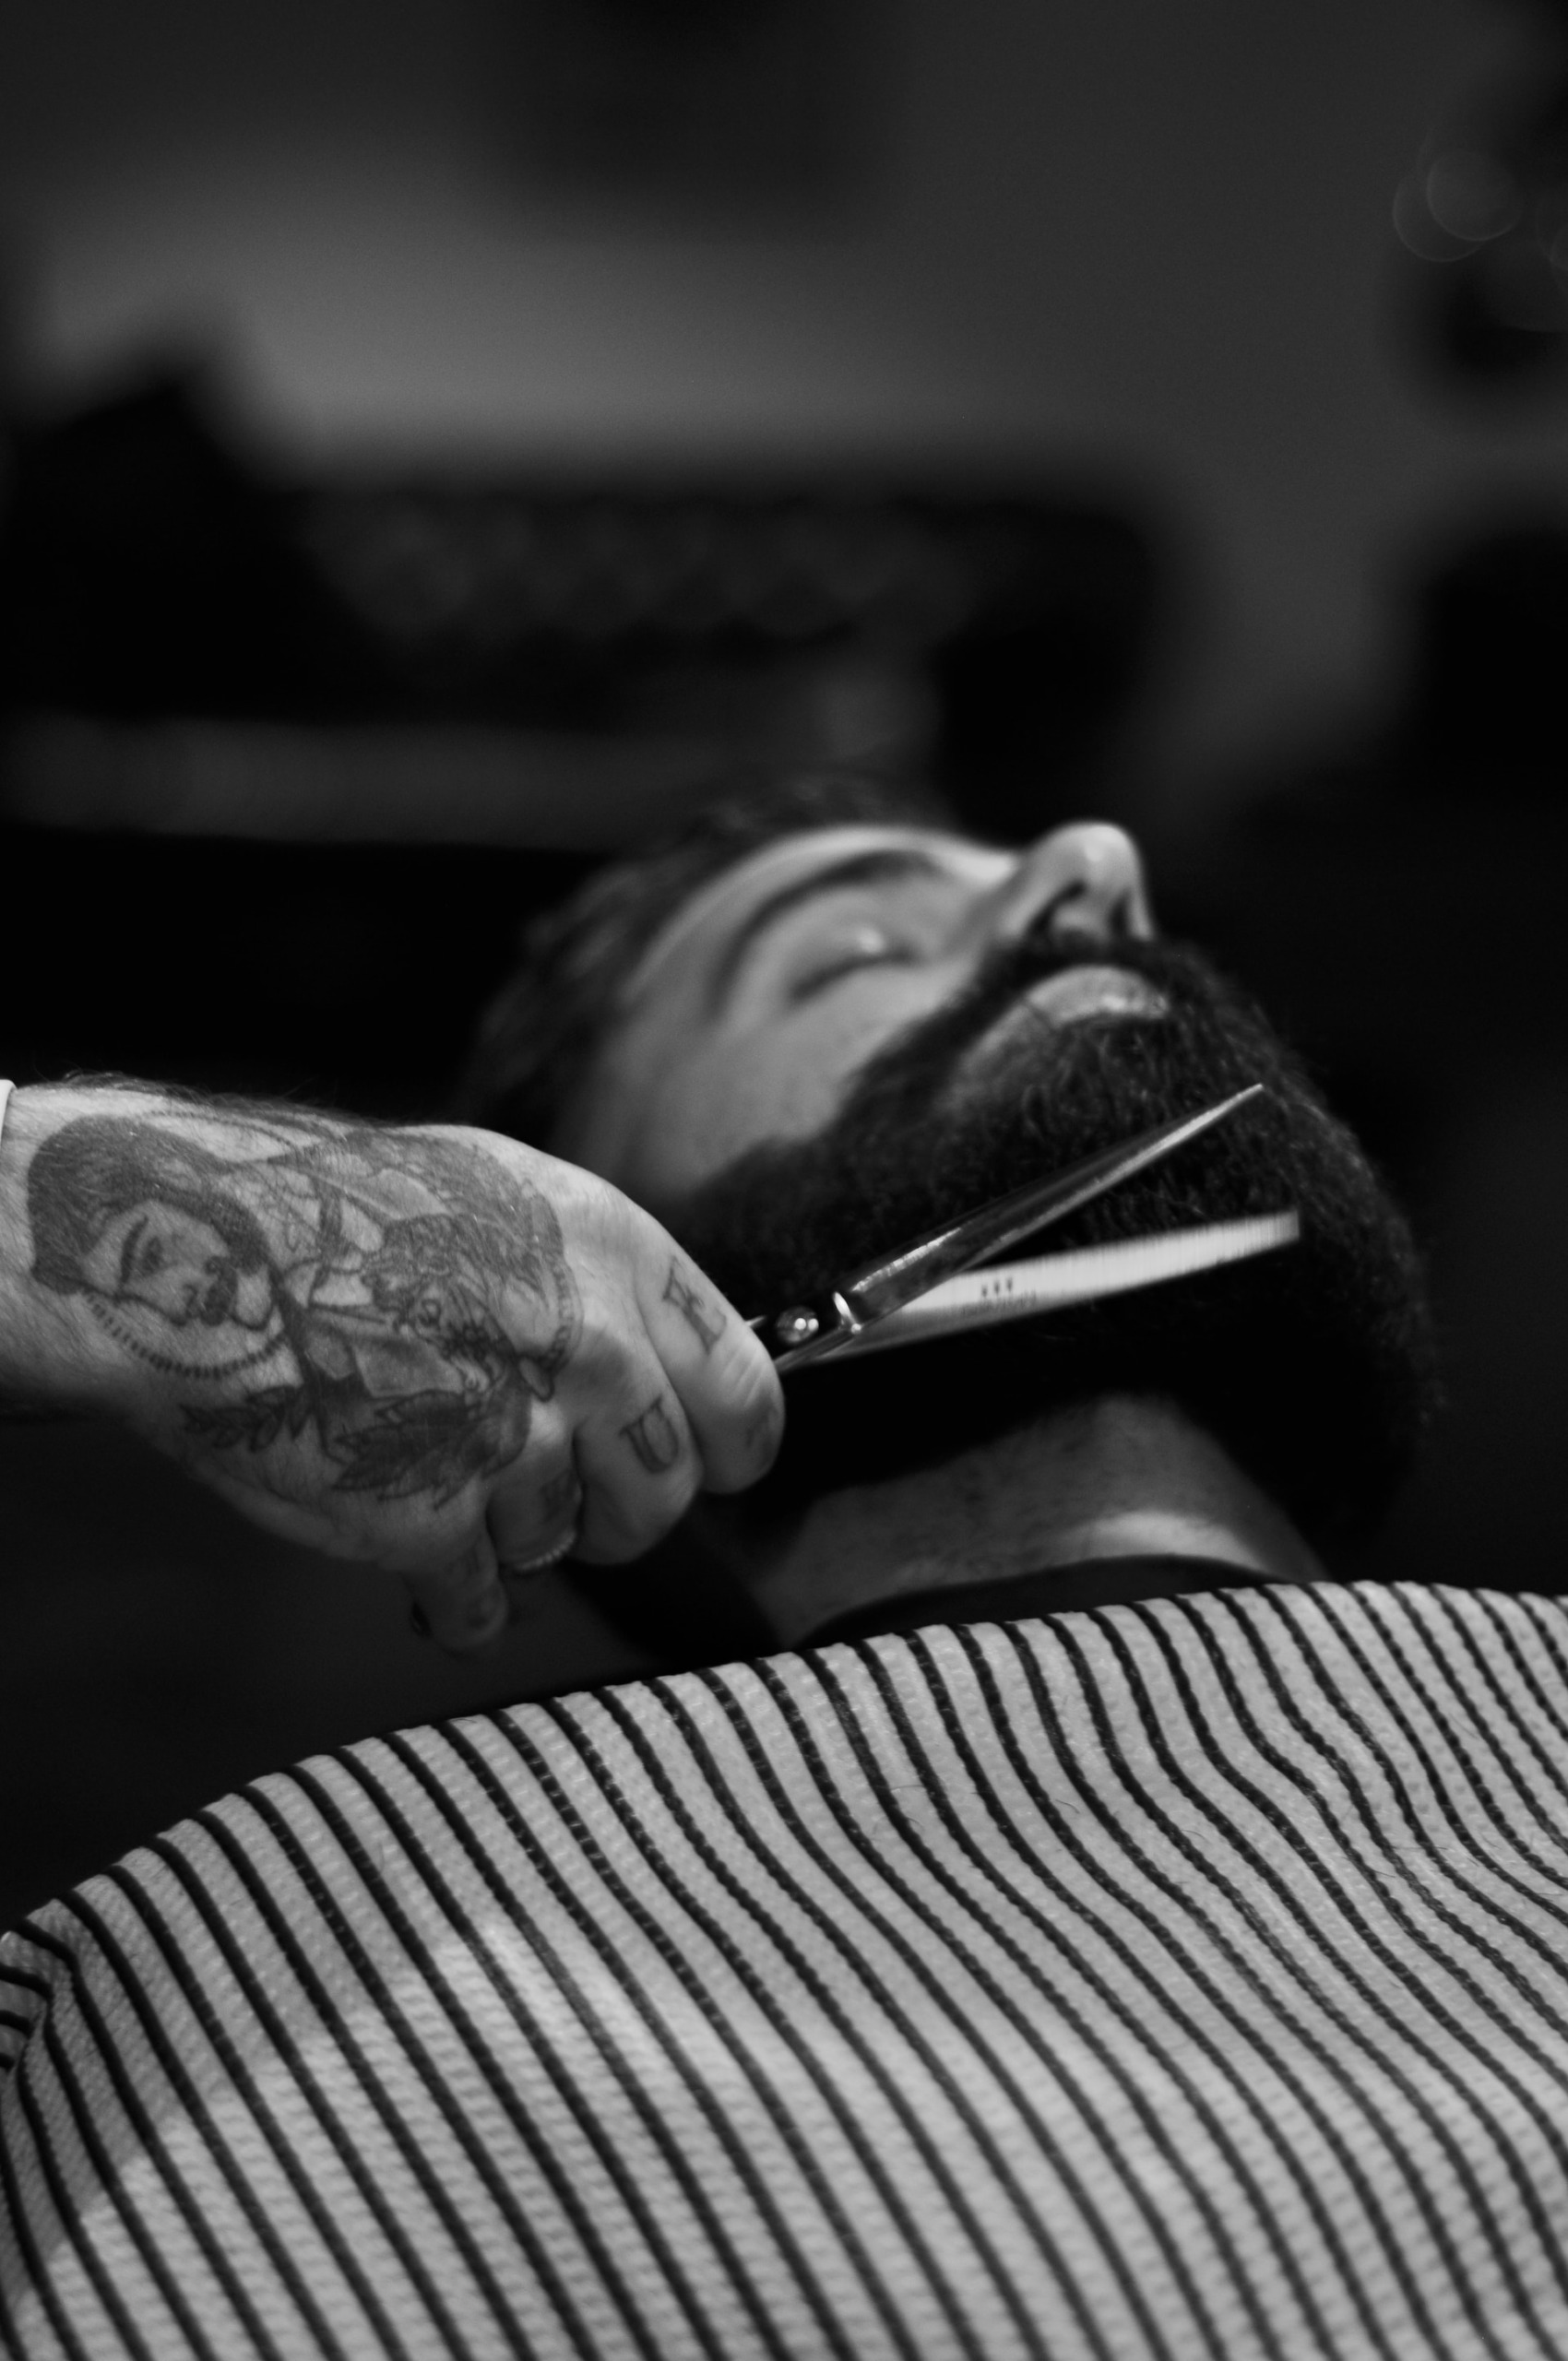 Guide on How to Sharpen and Care for Barbering Scissors